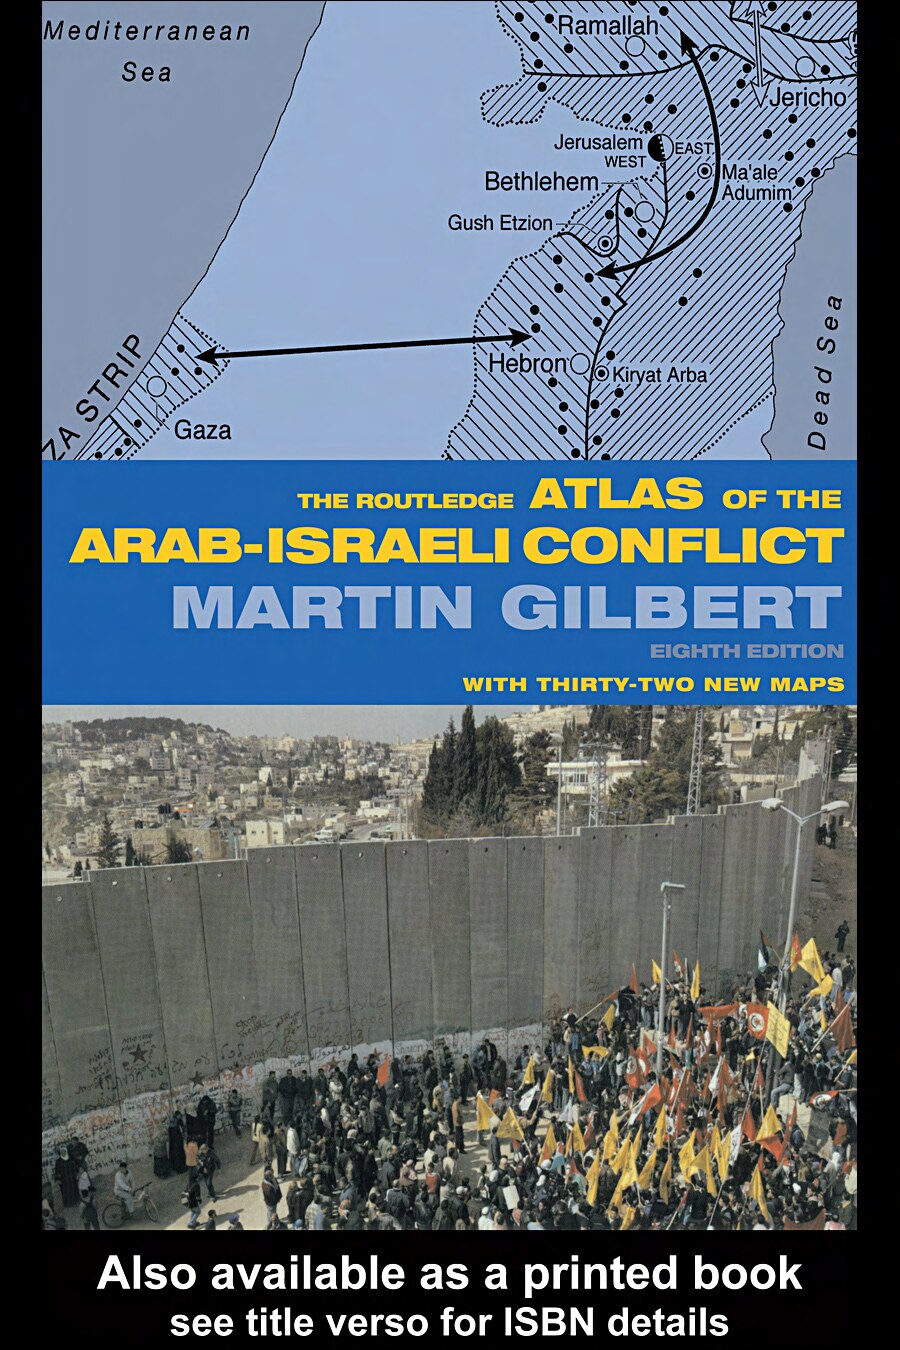 THE ROUTLEDGE ATLAS OF THE ARAB-ISRAELI CONFLICT